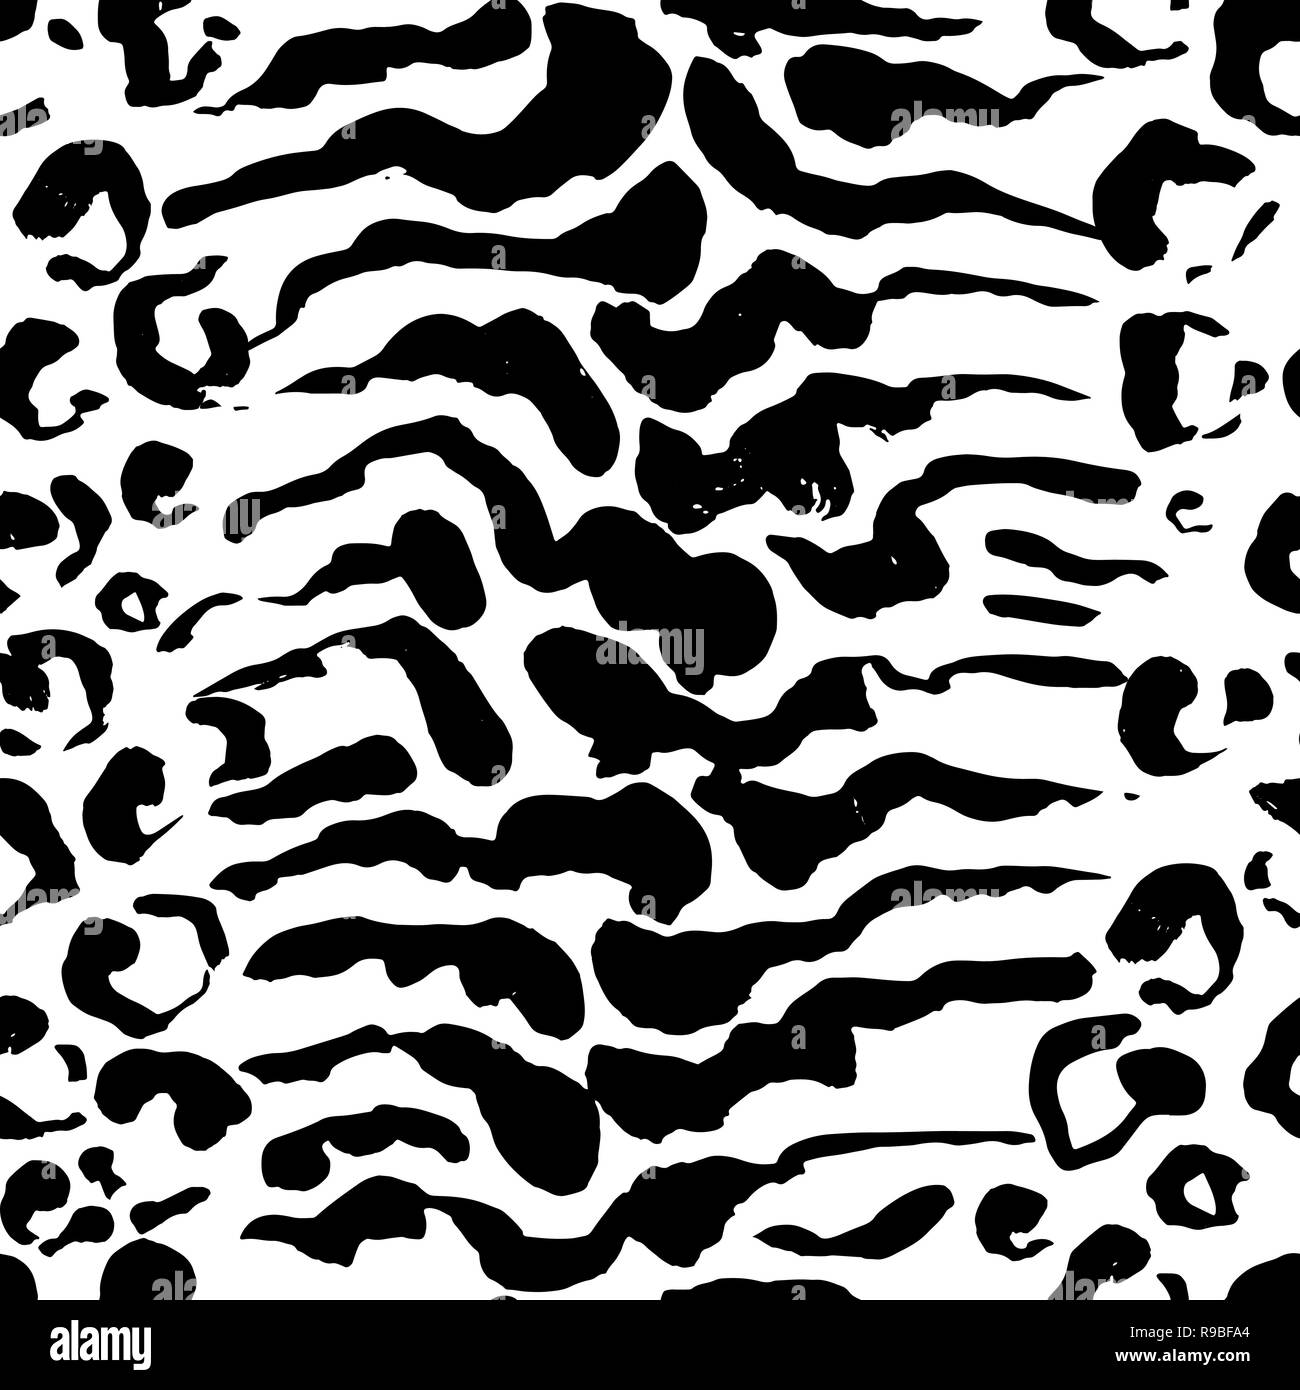 Brush painted leopard seamless pattern. Black and white tiger grunge background. Stock Vector